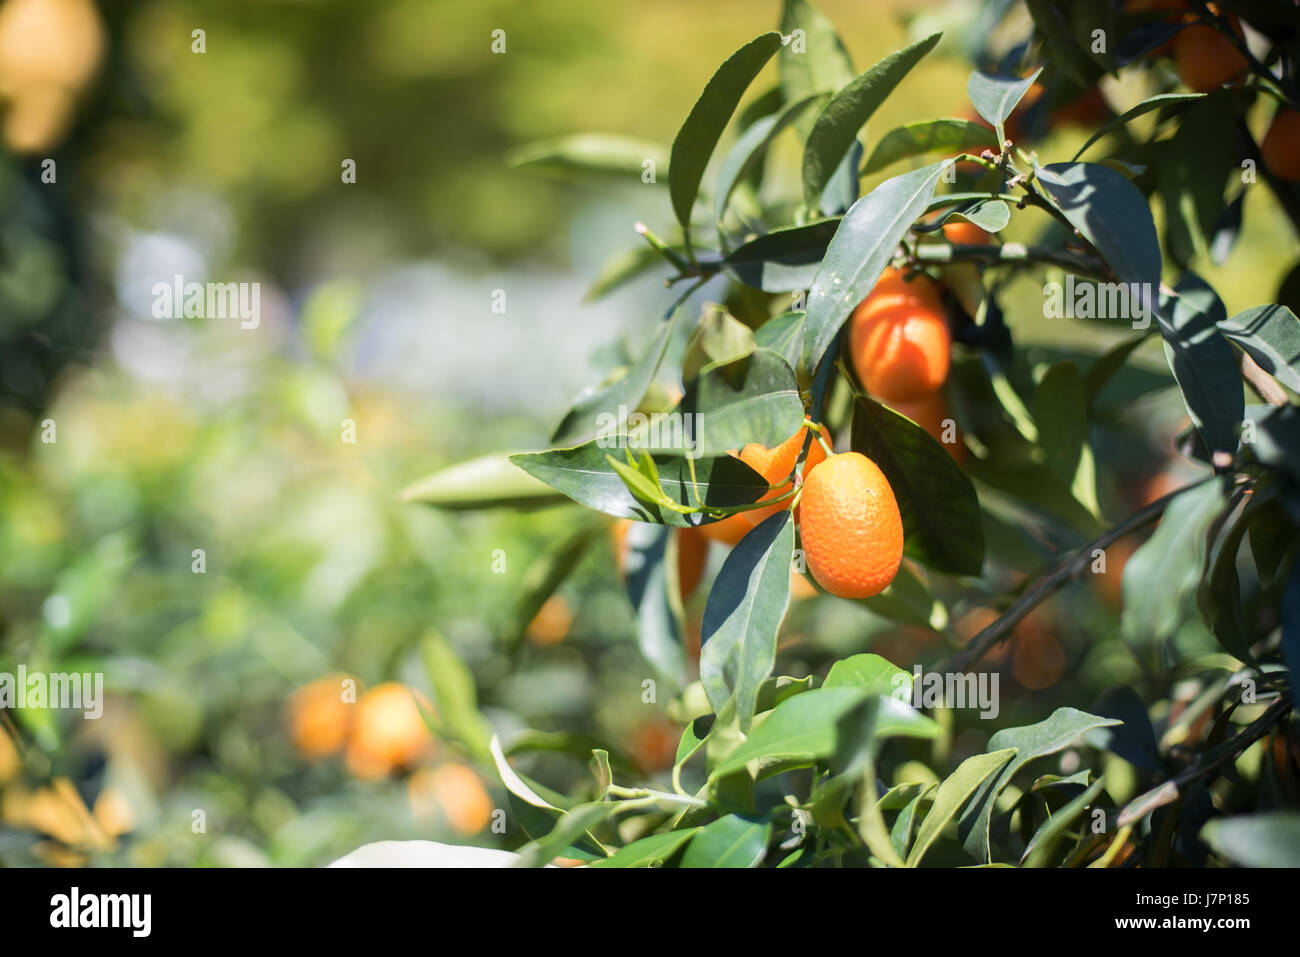 Kumquat fruit close up on green tree branch and leaves, selective focus and copy space on the left Stock Photo